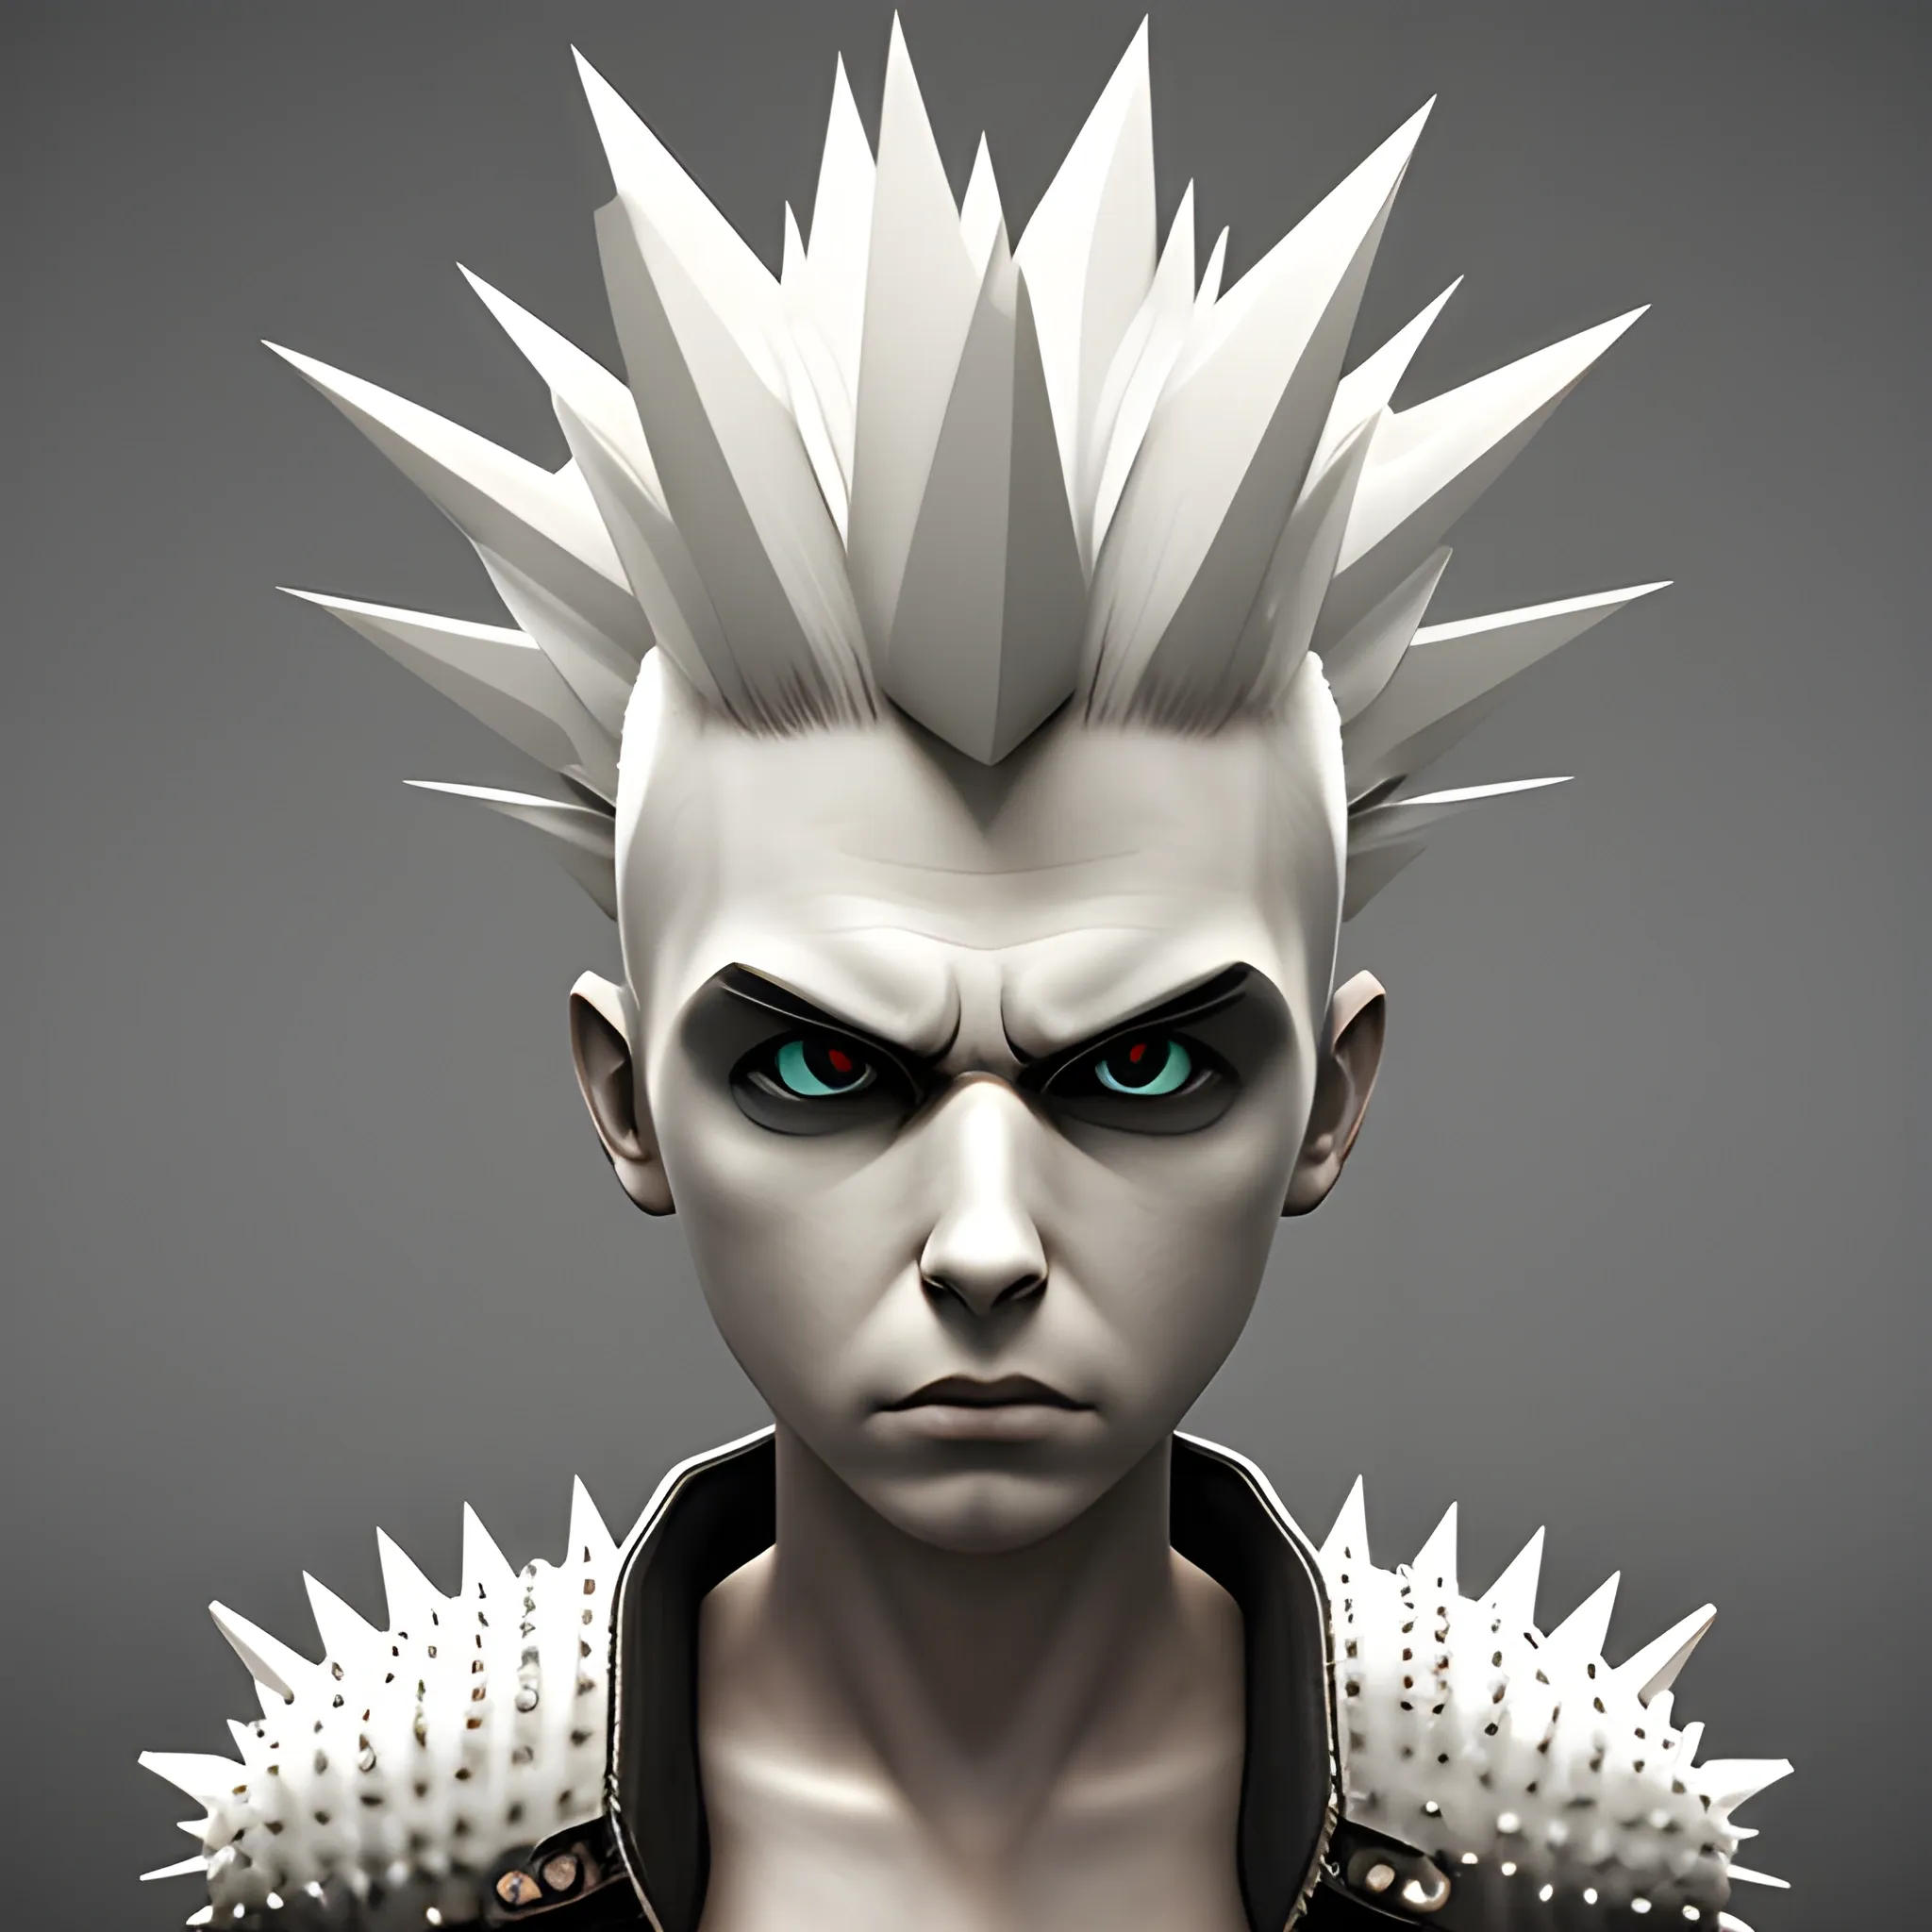 
3D White Spiky Head Punk Character Facing front